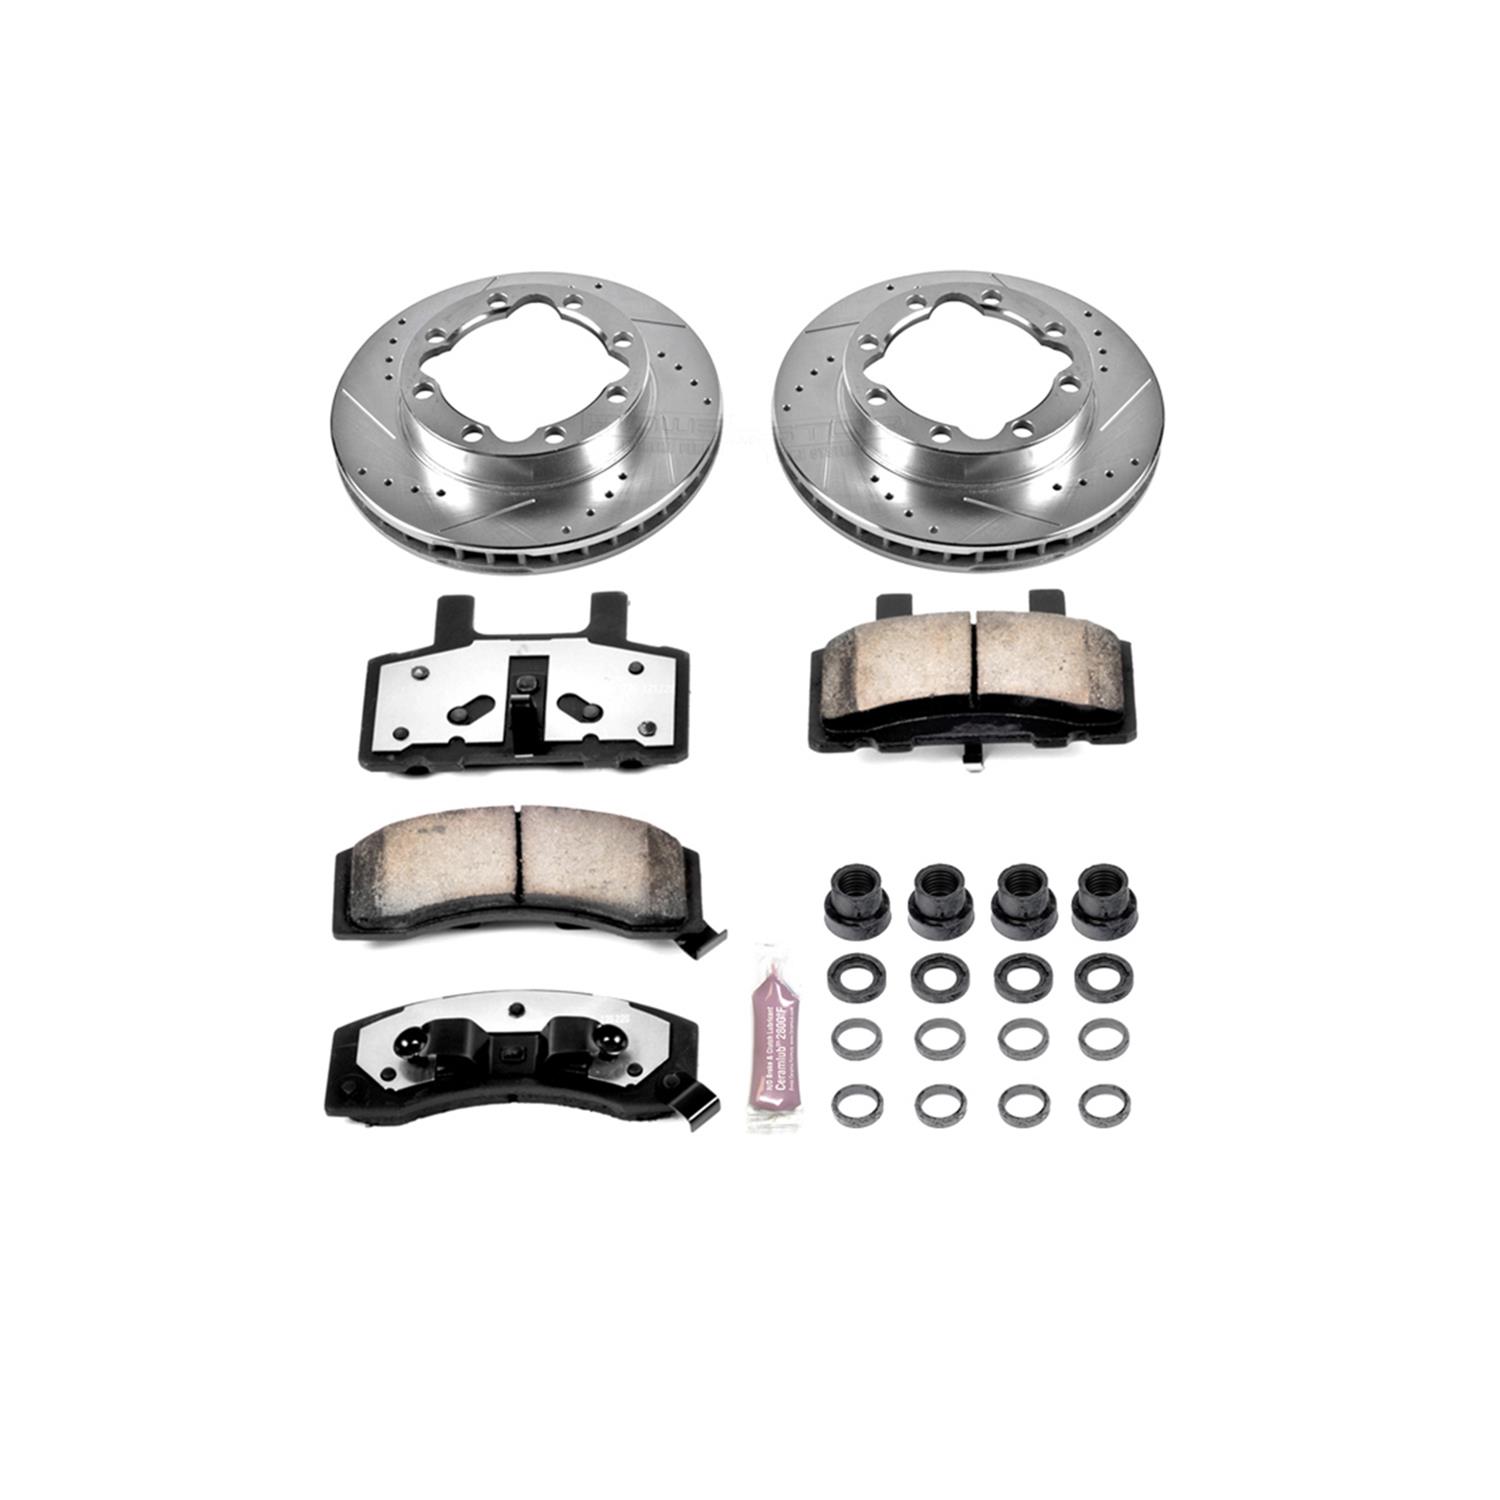 Power Stop K1524-36 Power Stop Z36 Truck and Tow Brake Upgrade Kits